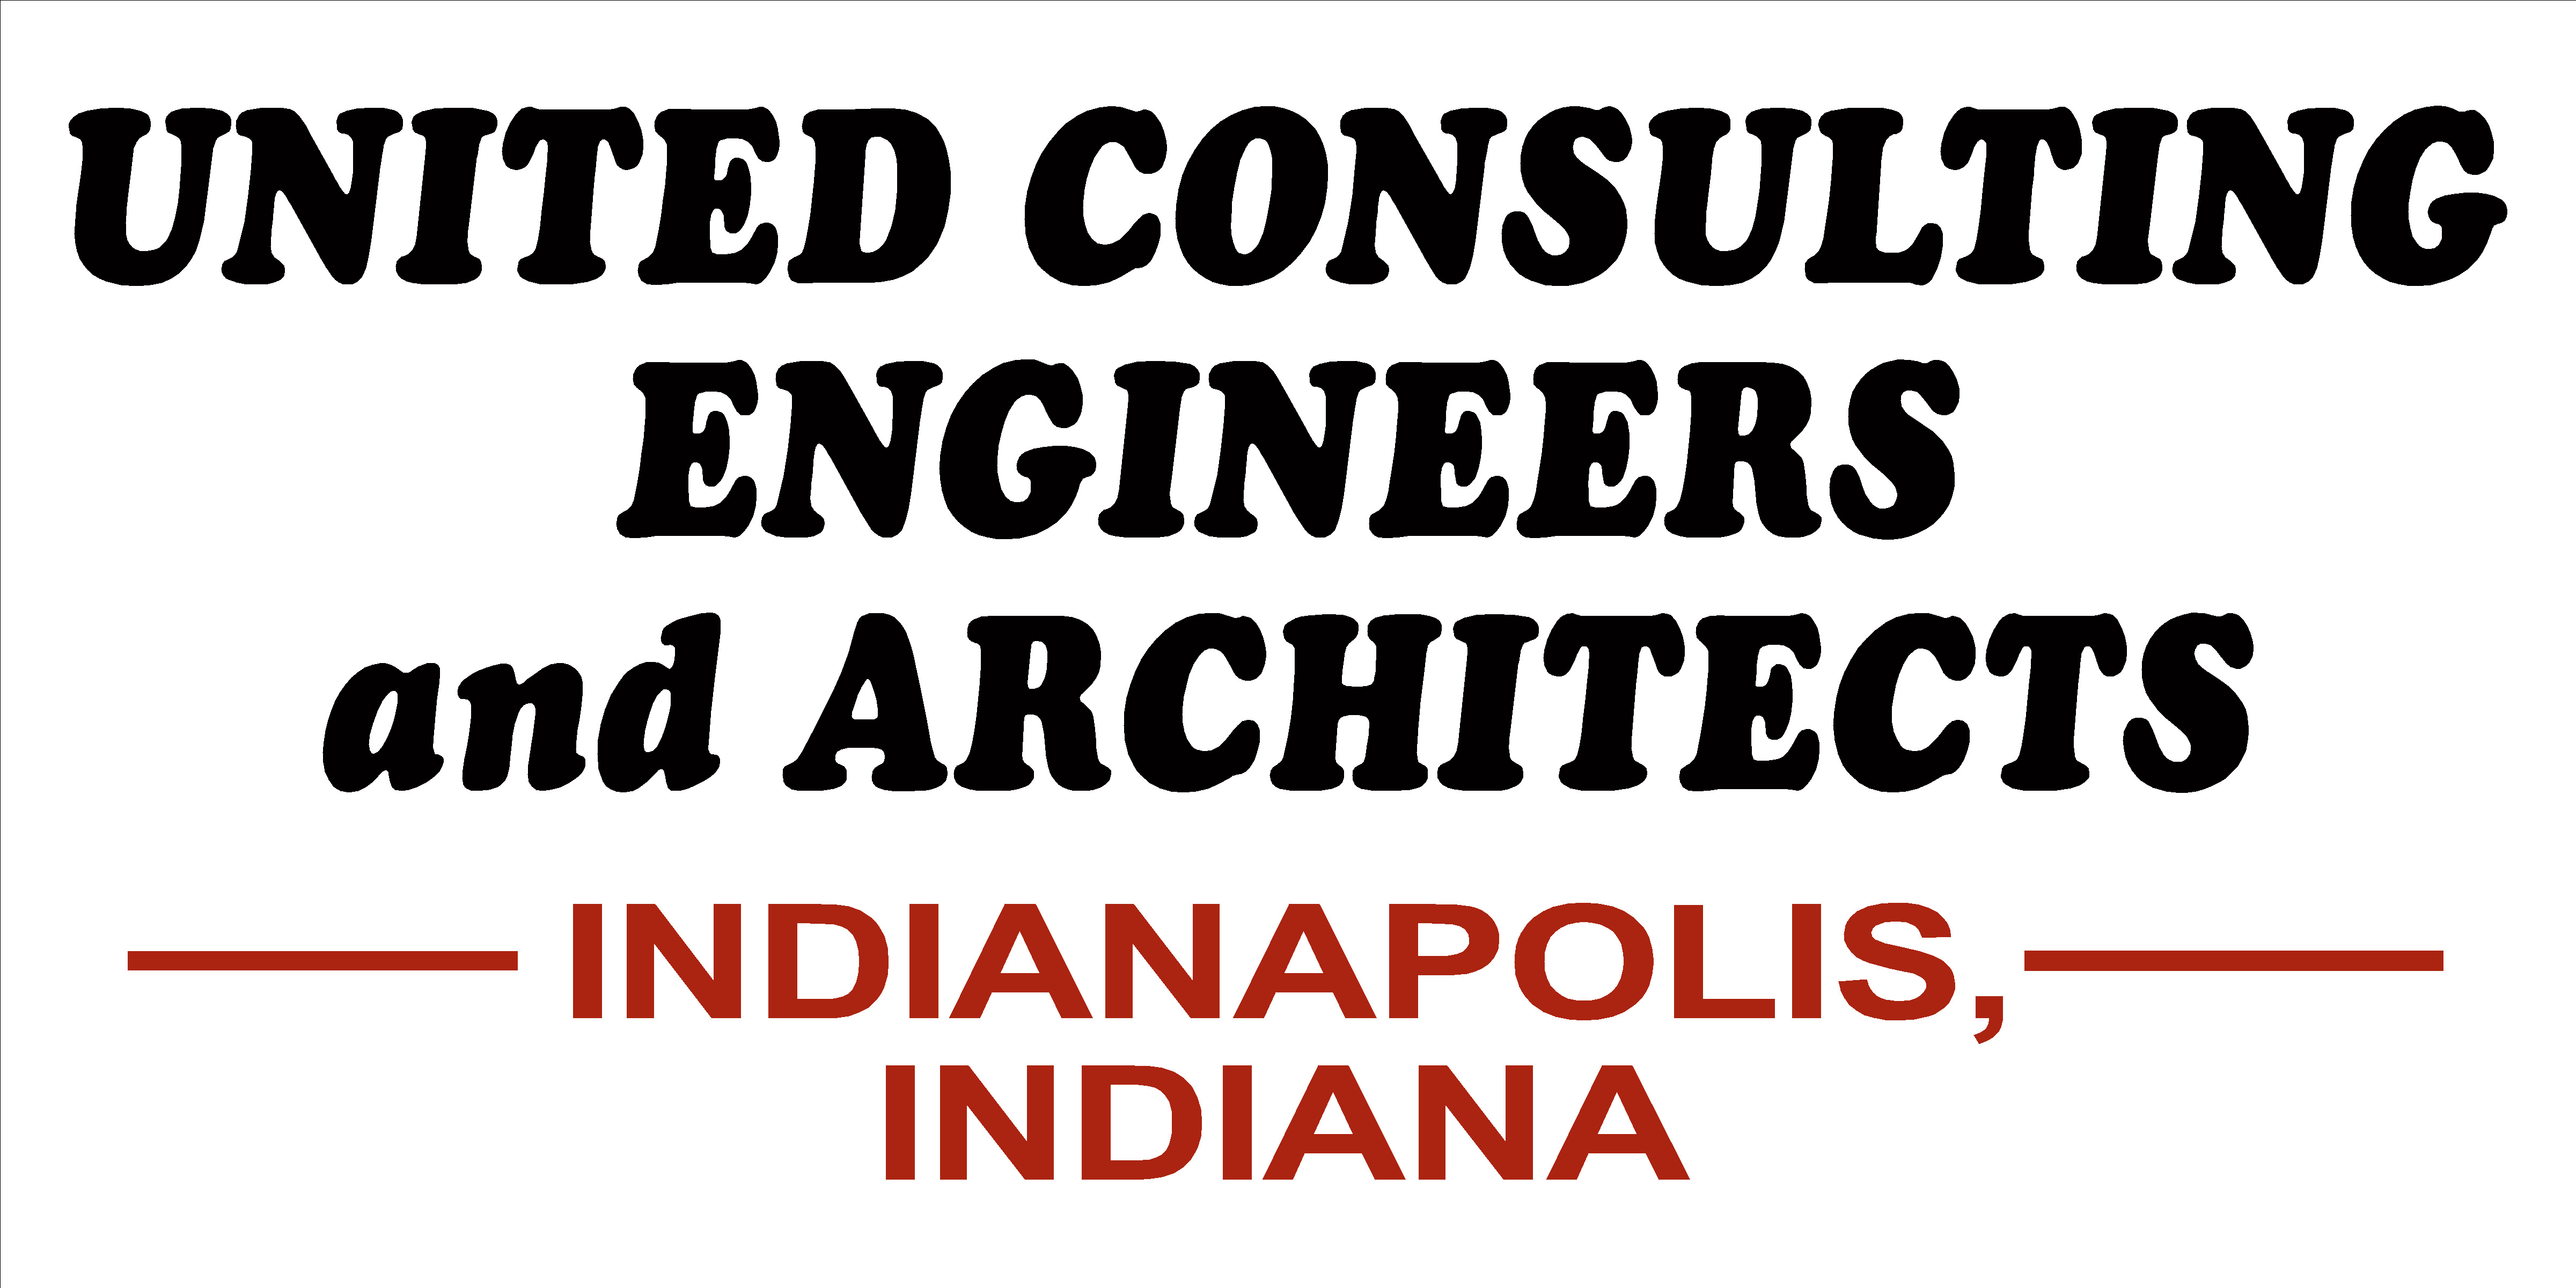 United-Consulting-Engineers